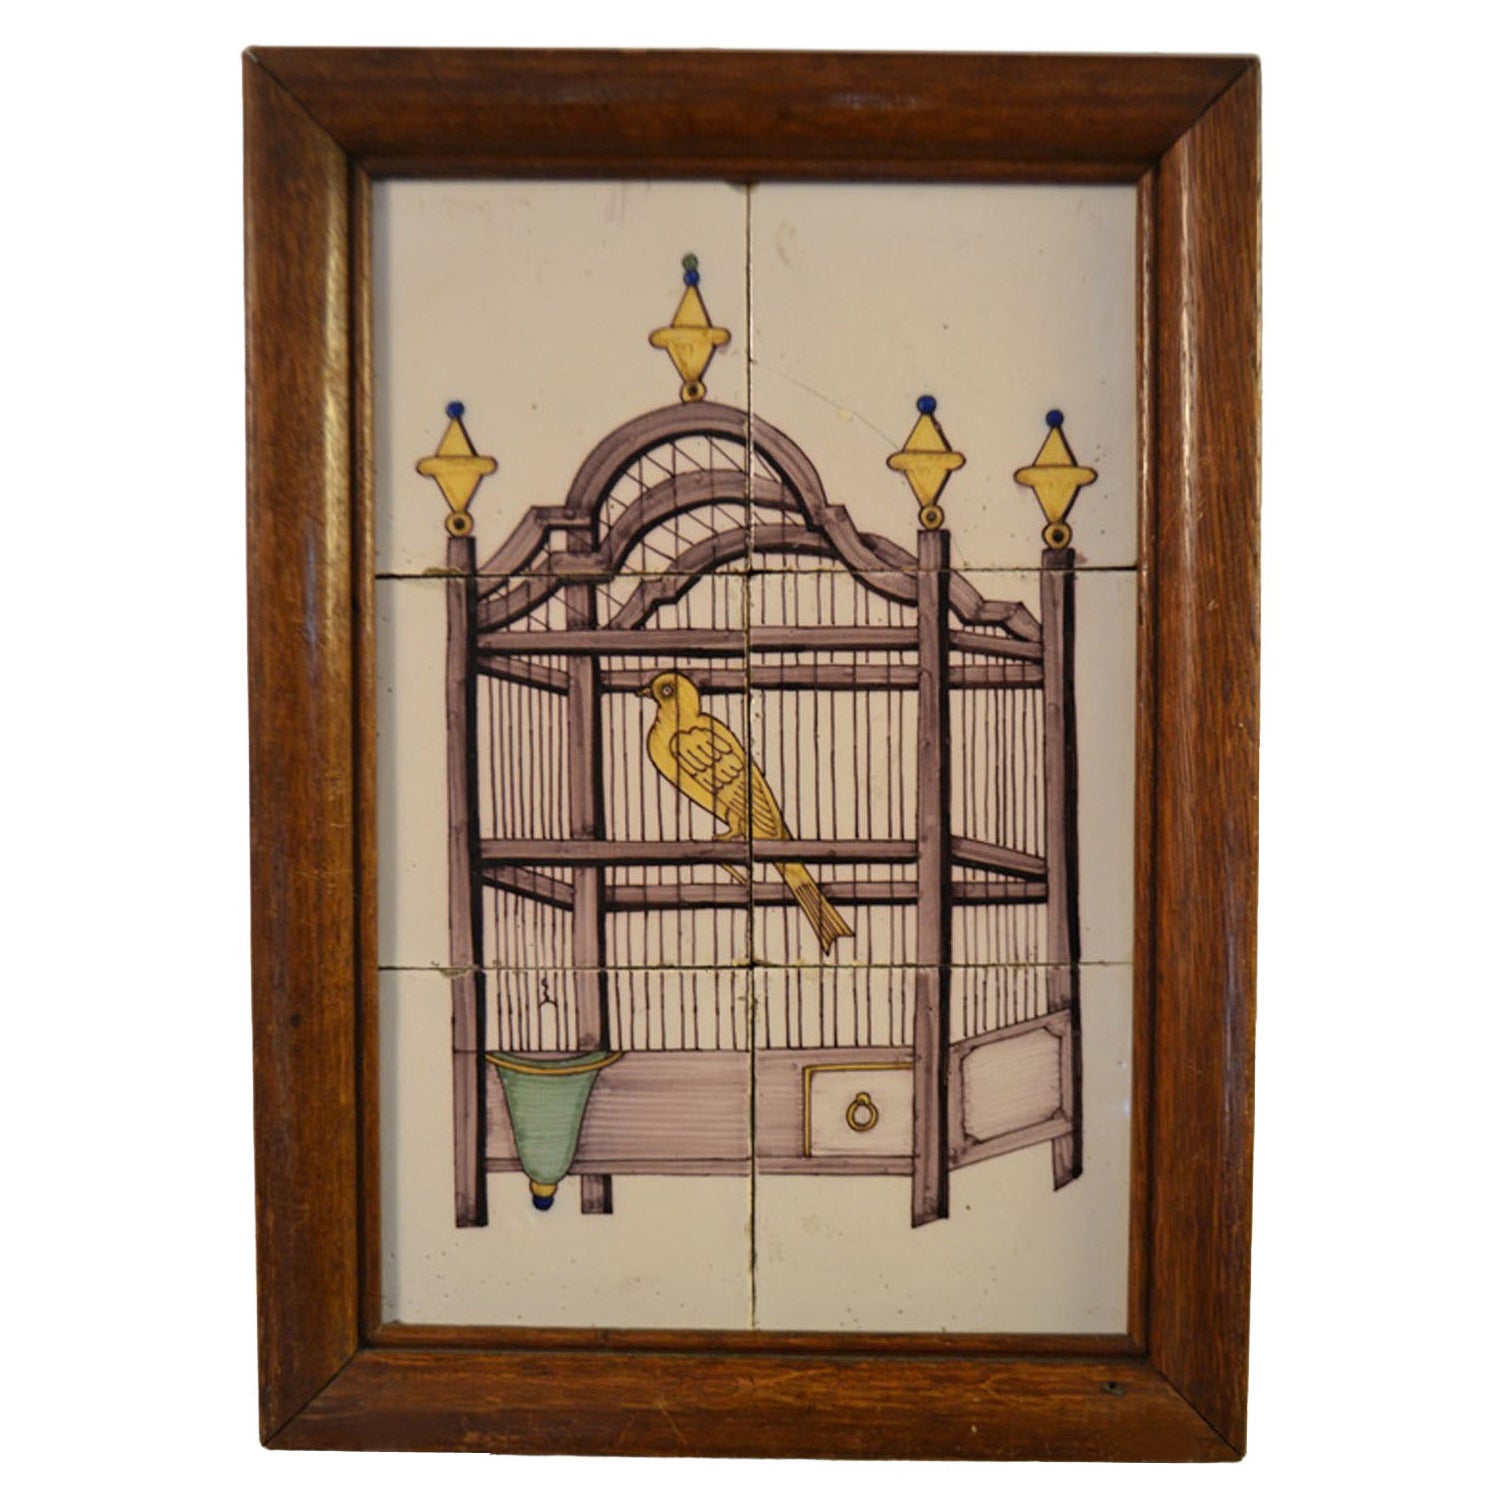 18th Century Delft Tile Panel of a Bird in a Cage